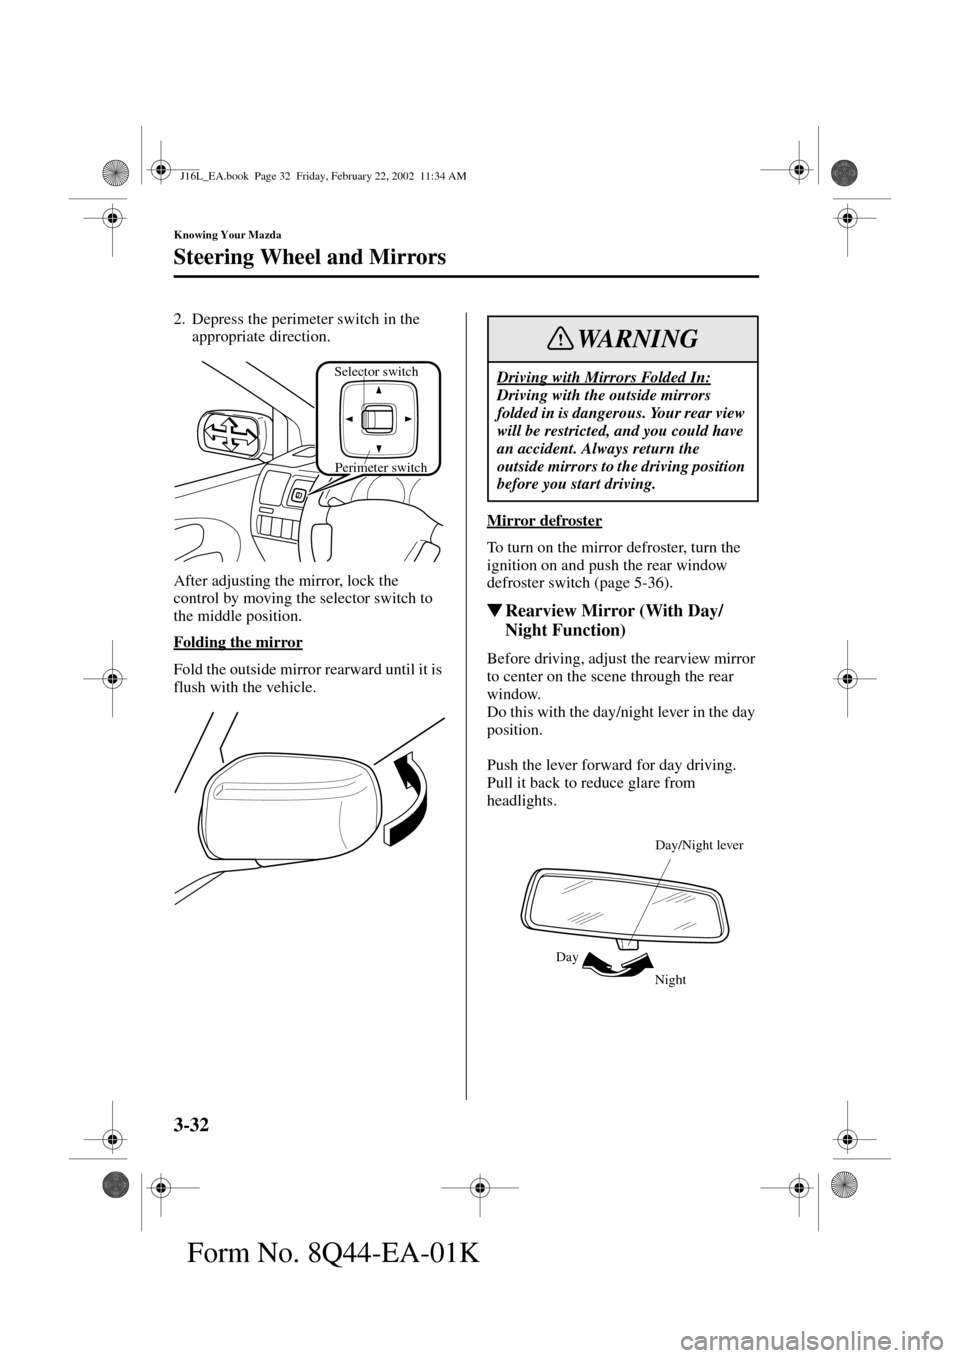 MAZDA MODEL MPV 2002  Owners Manual (in English) 3-32
Knowing Your Mazda
Steering Wheel and Mirrors
Form No. 8Q44-EA-01K
2. Depress the perimeter switch in the 
appropriate direction.
After adjusting the mirror, lock the 
control by moving the selec